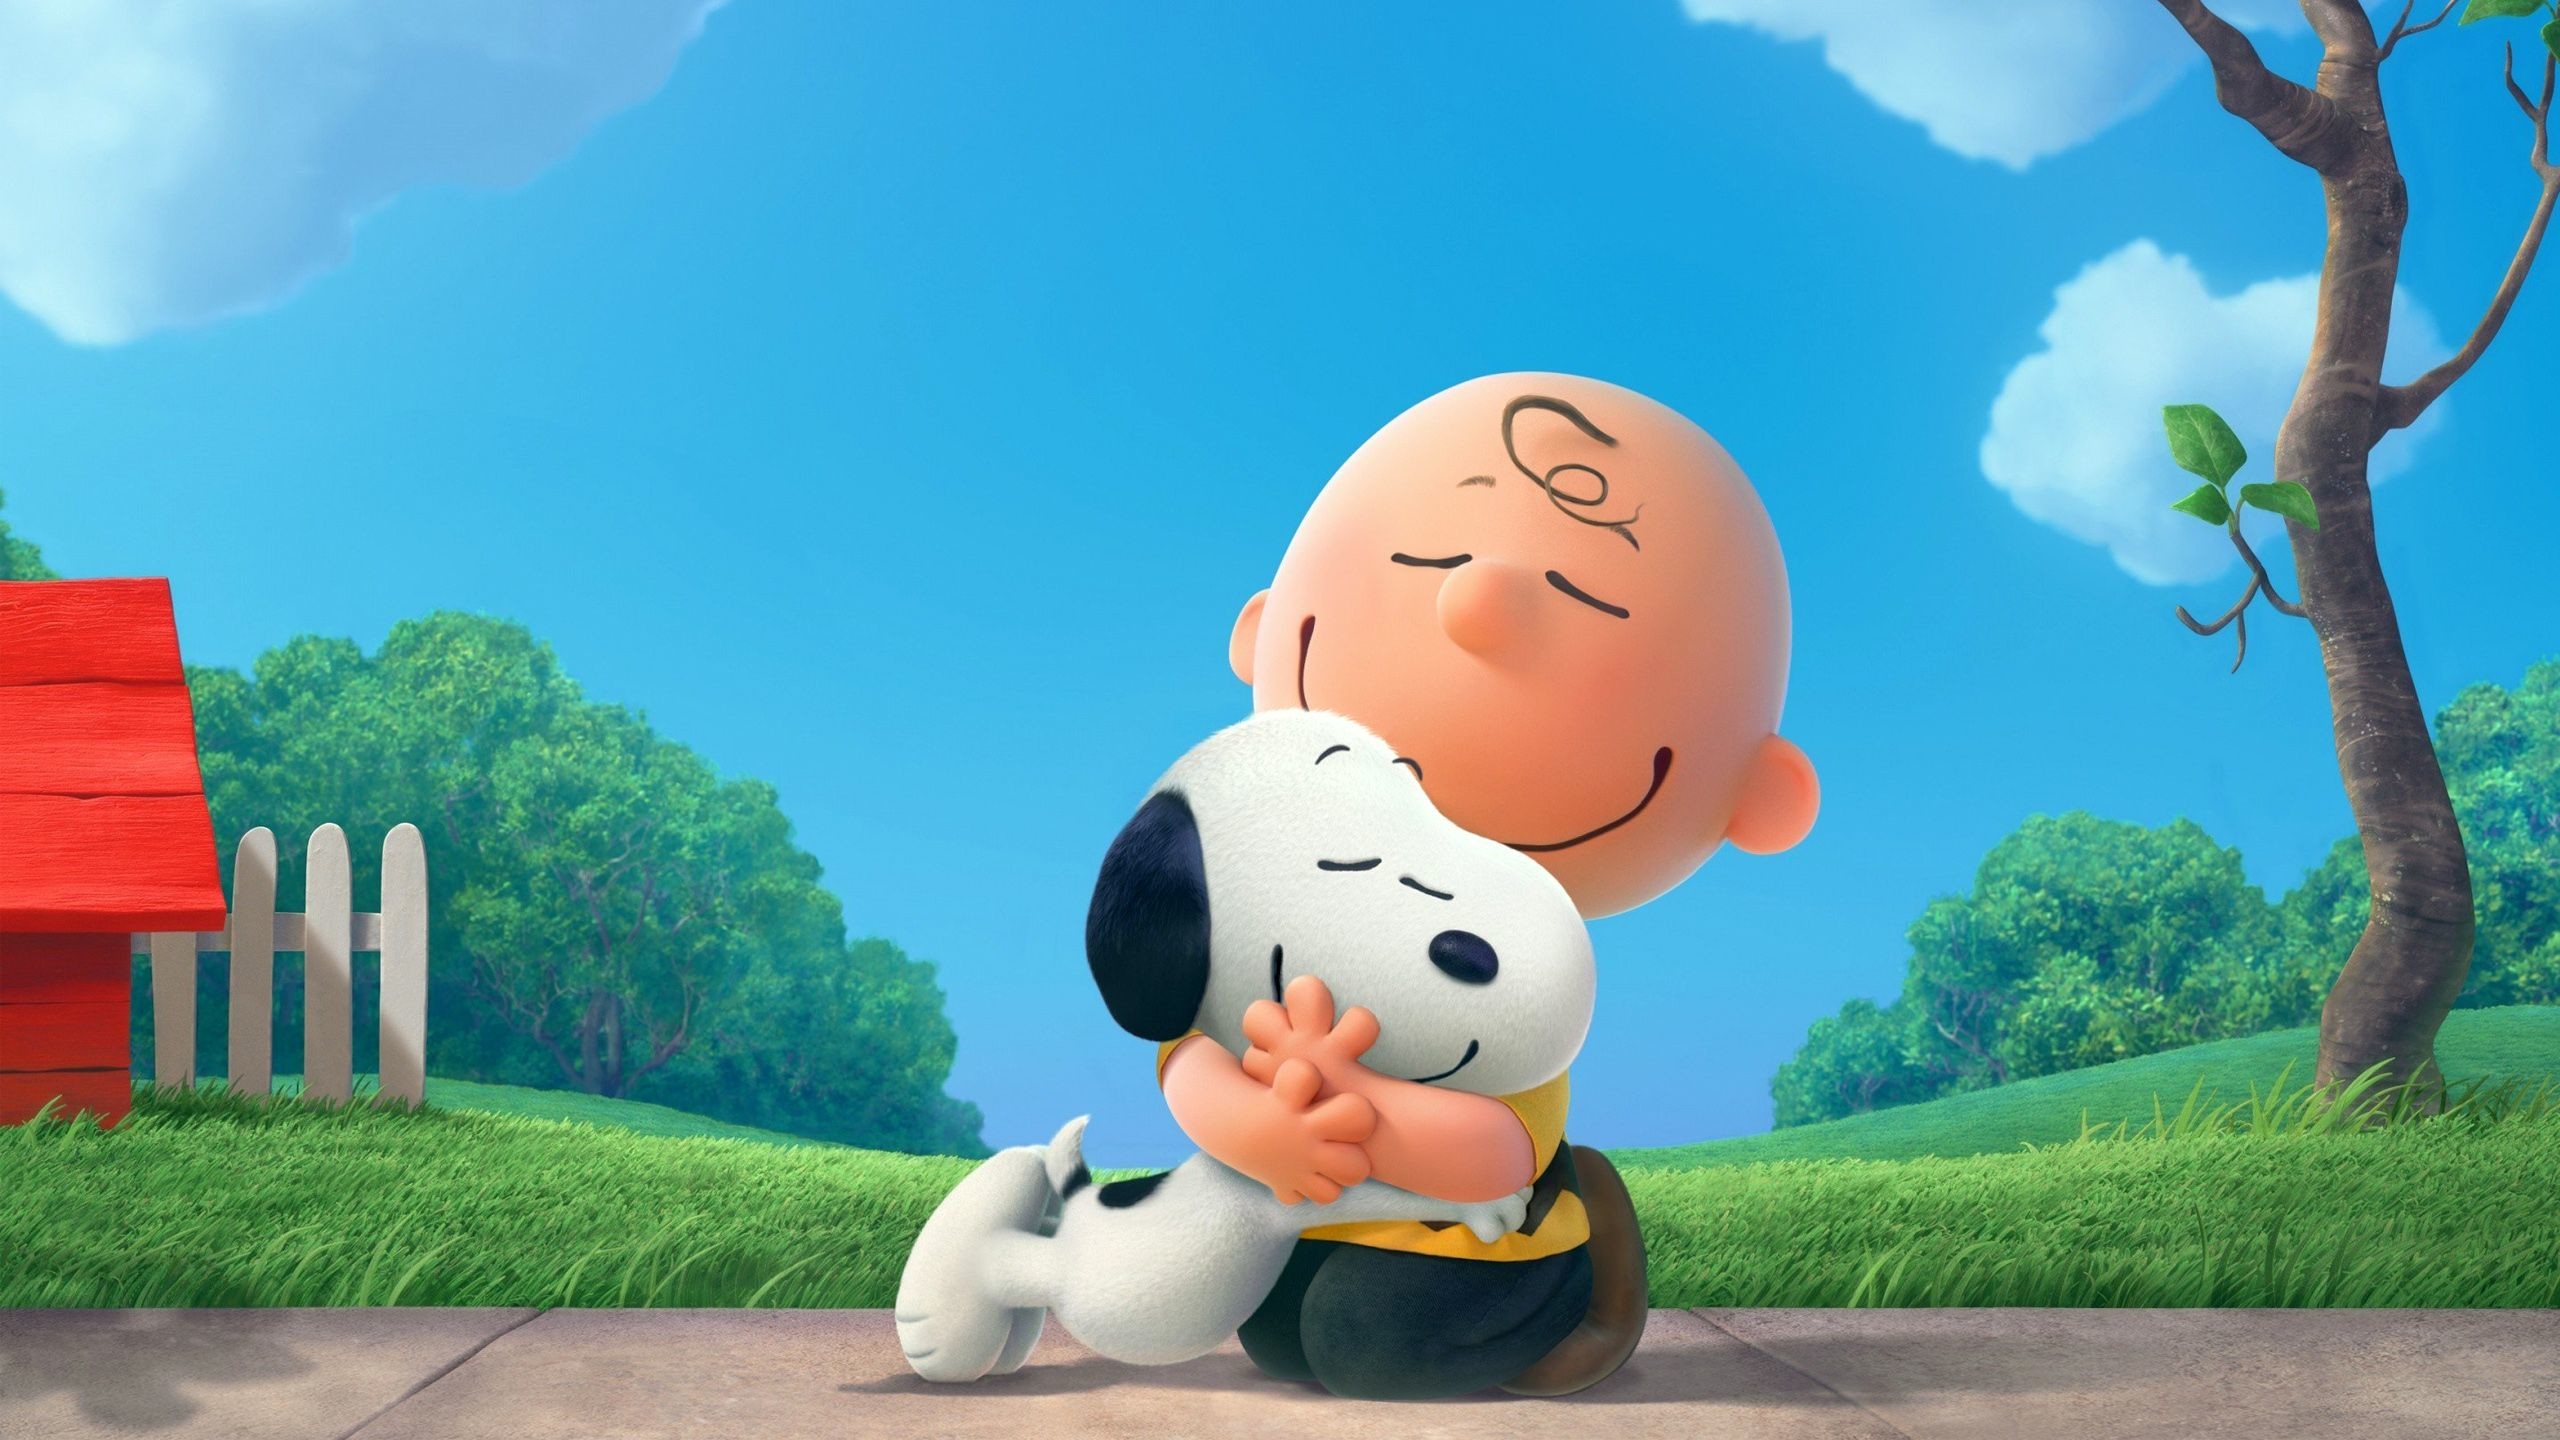 2560x1440 The Peanuts Movie Computer Wallpapers, Desktop Backgrounds .